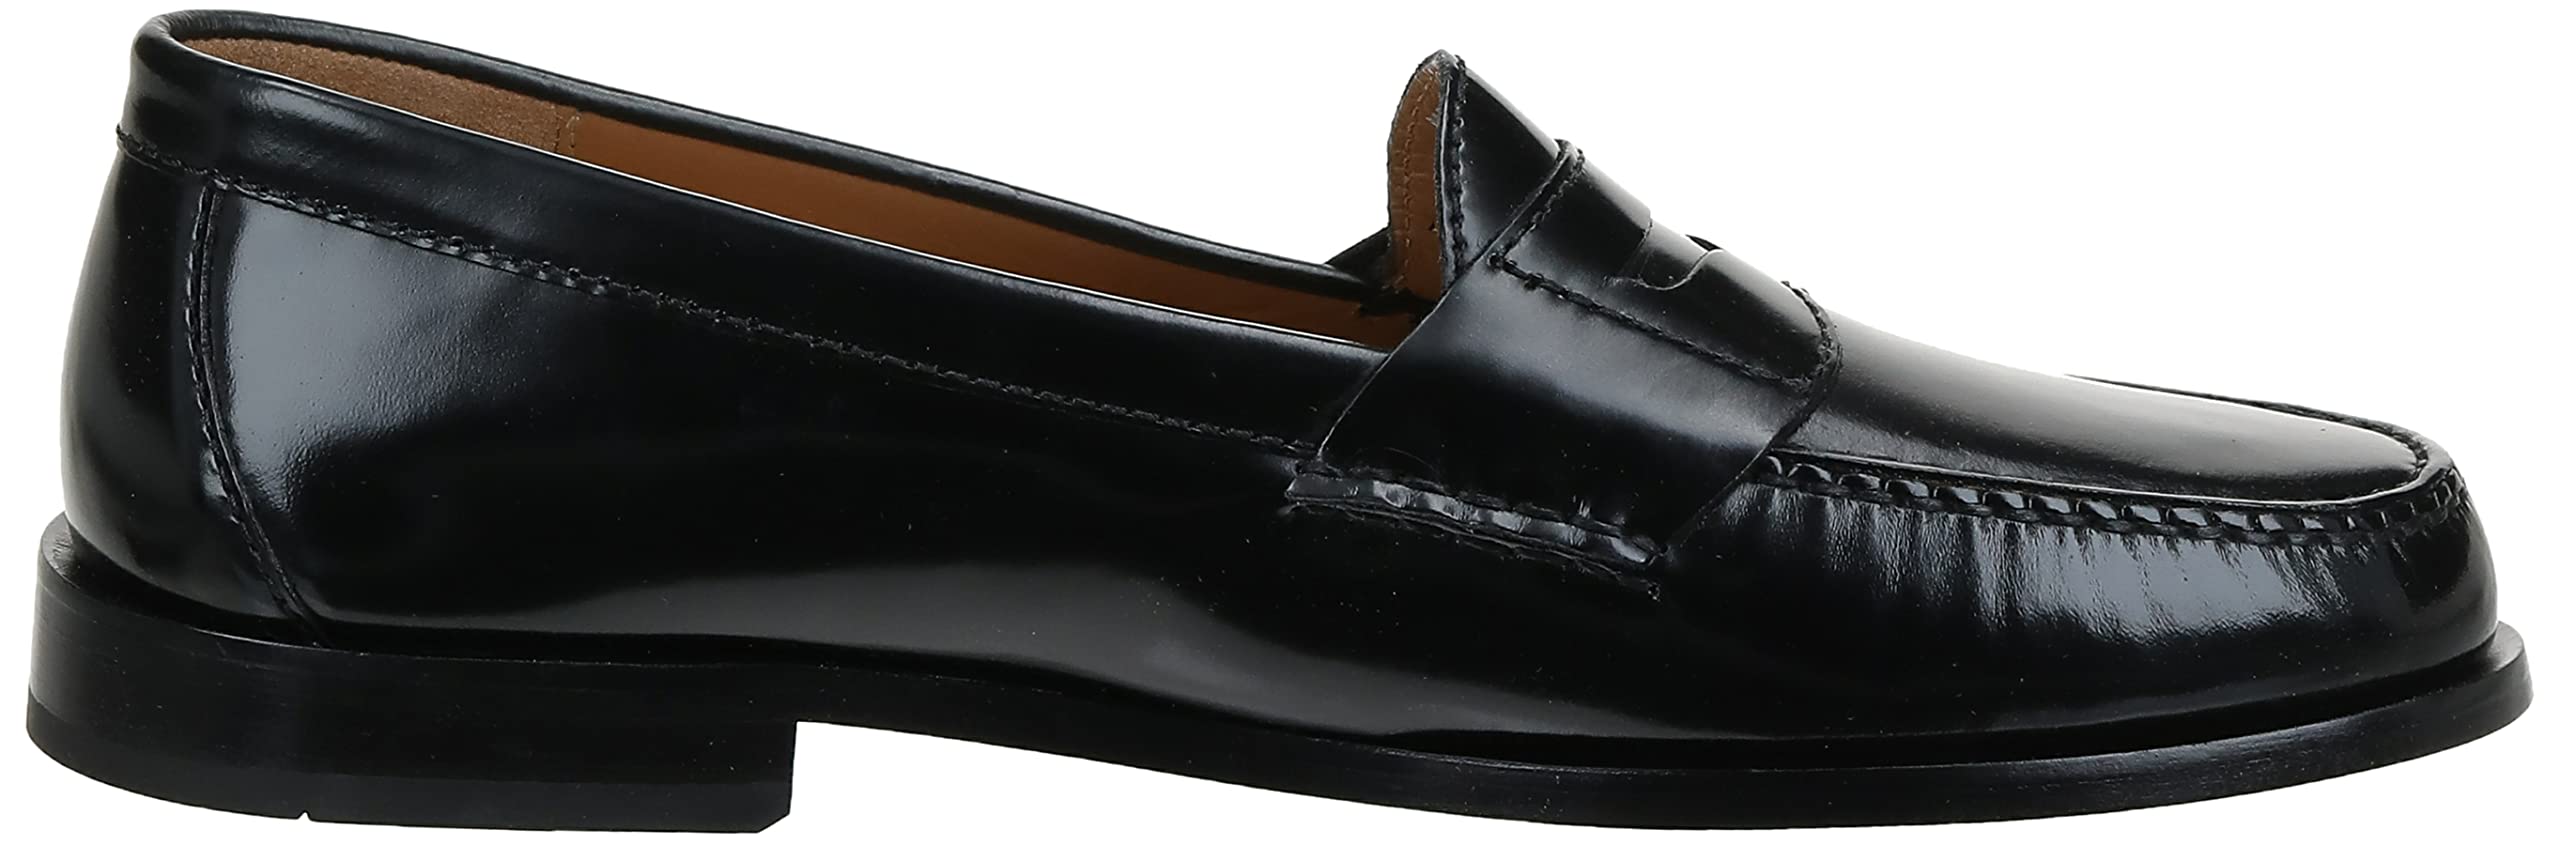 Cole Haan Men's Pinch Penny Slip-On Loafer